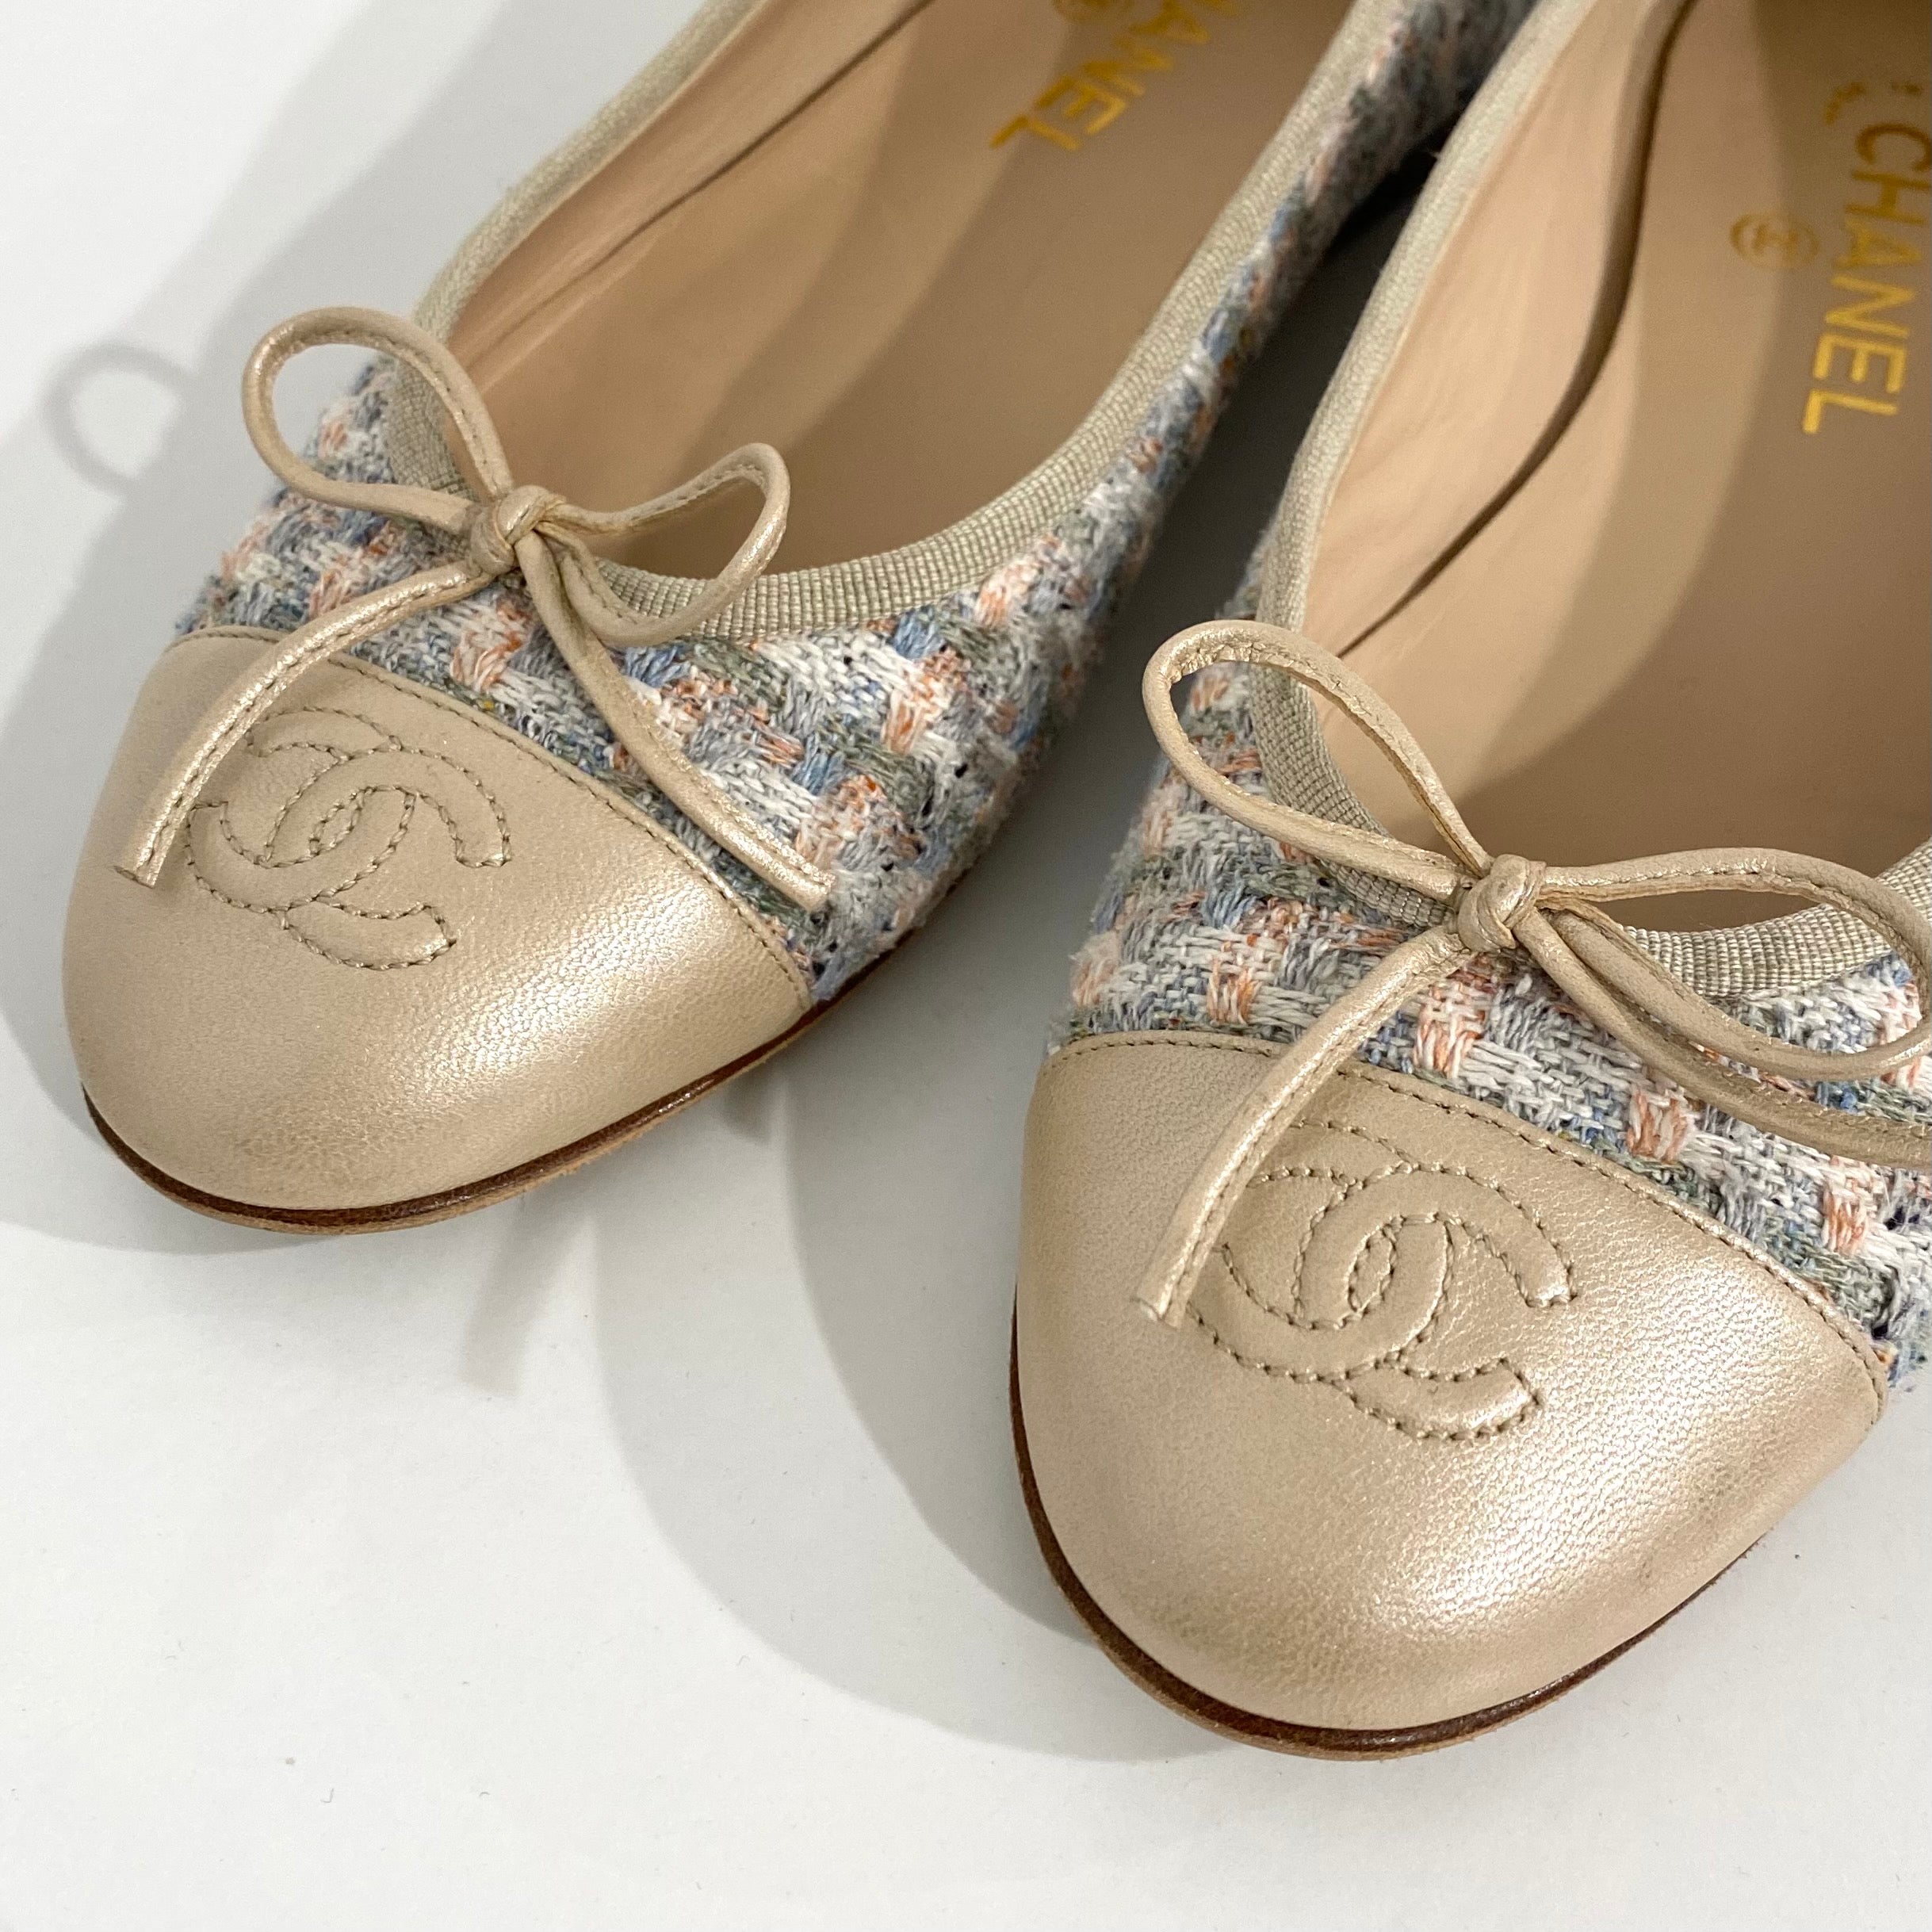 CHANEL Quilted Ballerinas in Beige (39) - More Than You Can Imagine